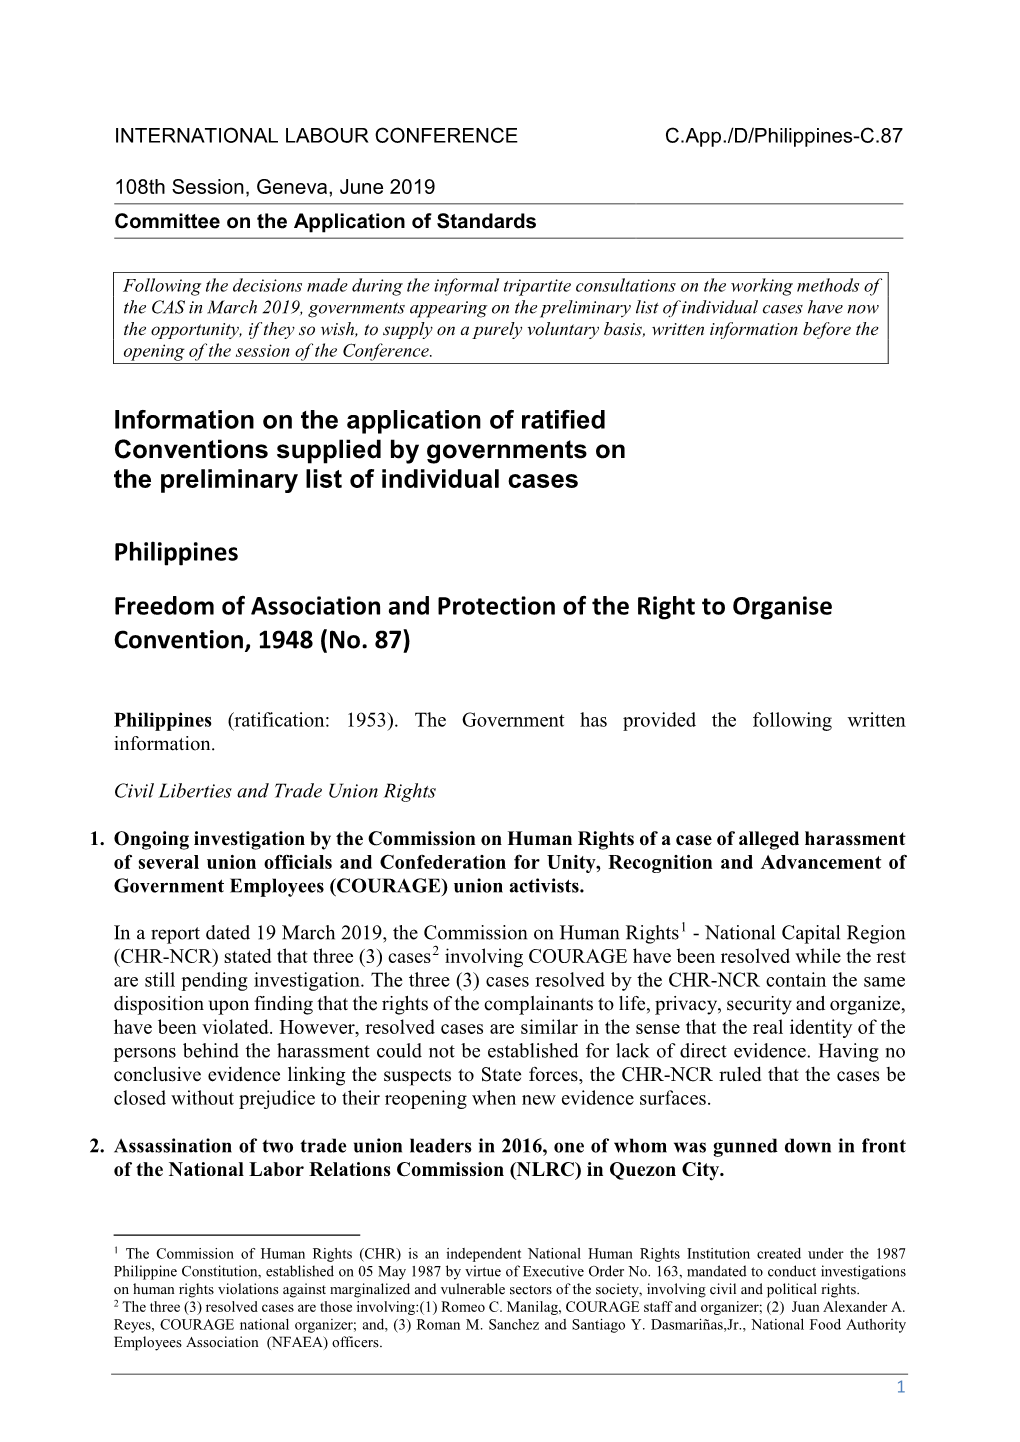 Philippines Freedom of Association and Protection of the Right to Organise Convention, 1948 (No